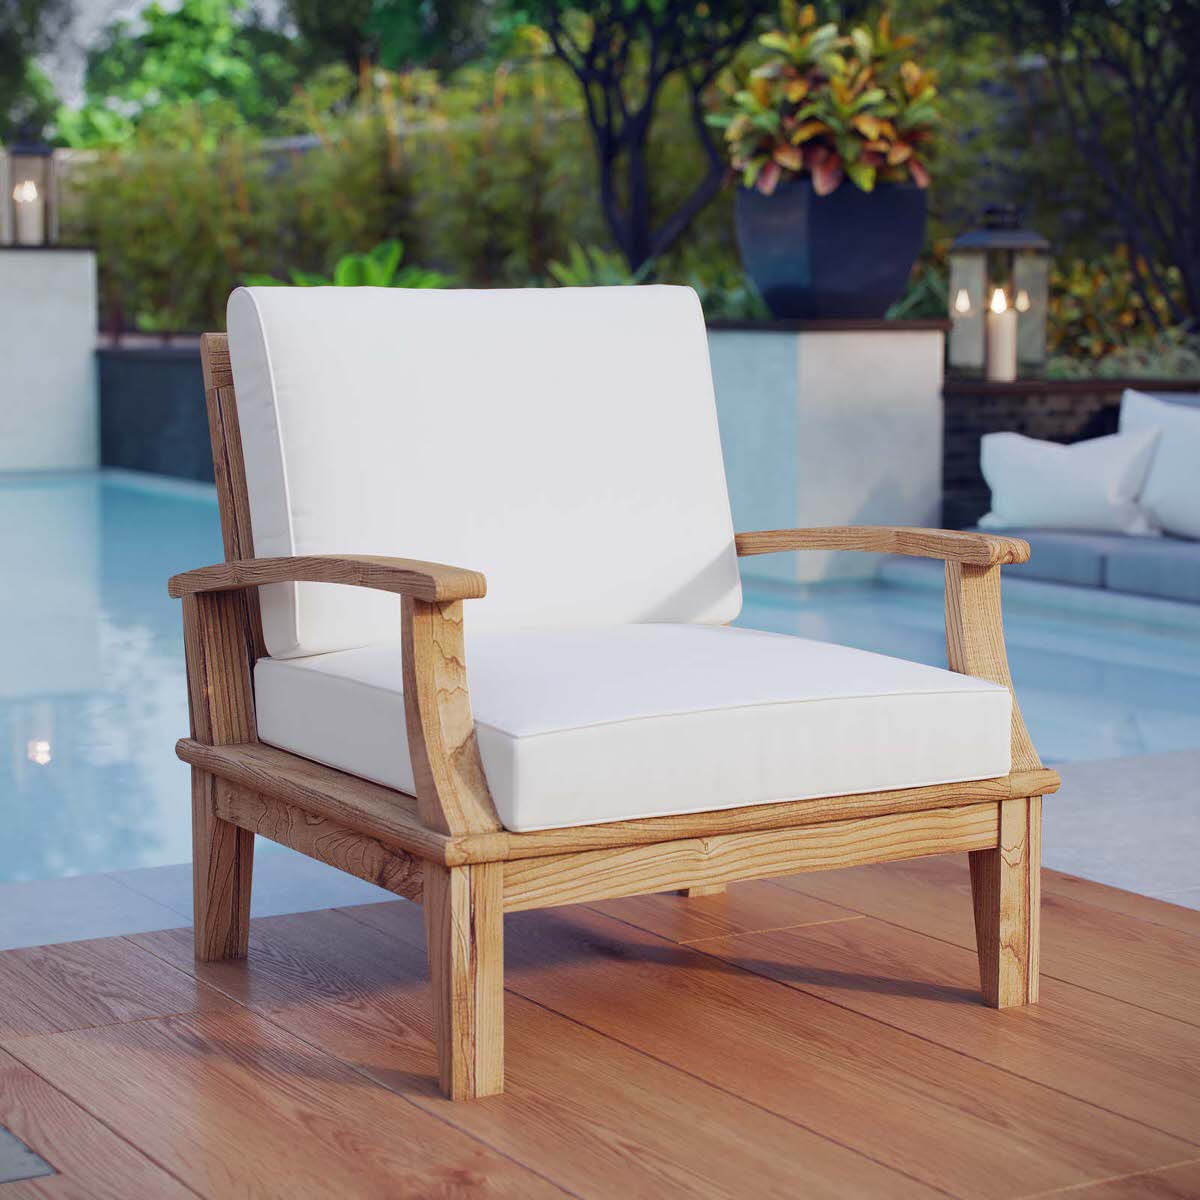 Choosing the Perfect Outdoor Chairs